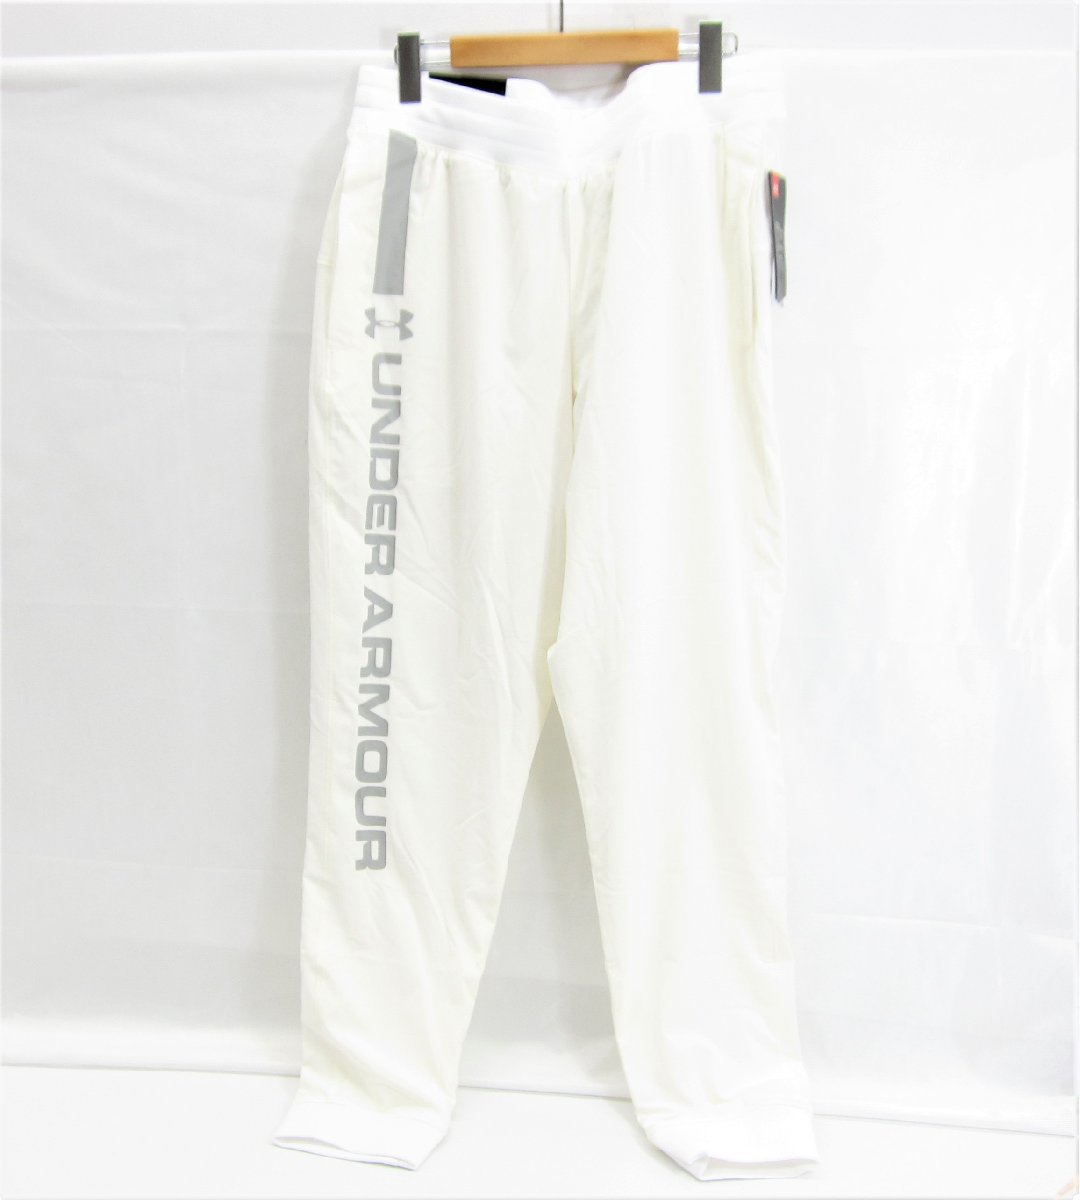 UNDER ARMOUR アンダーアーマー ウインドパンツ UA Tricot Lined Pant 1320662 SIZE:XL メンズ 衣類 □UF3725